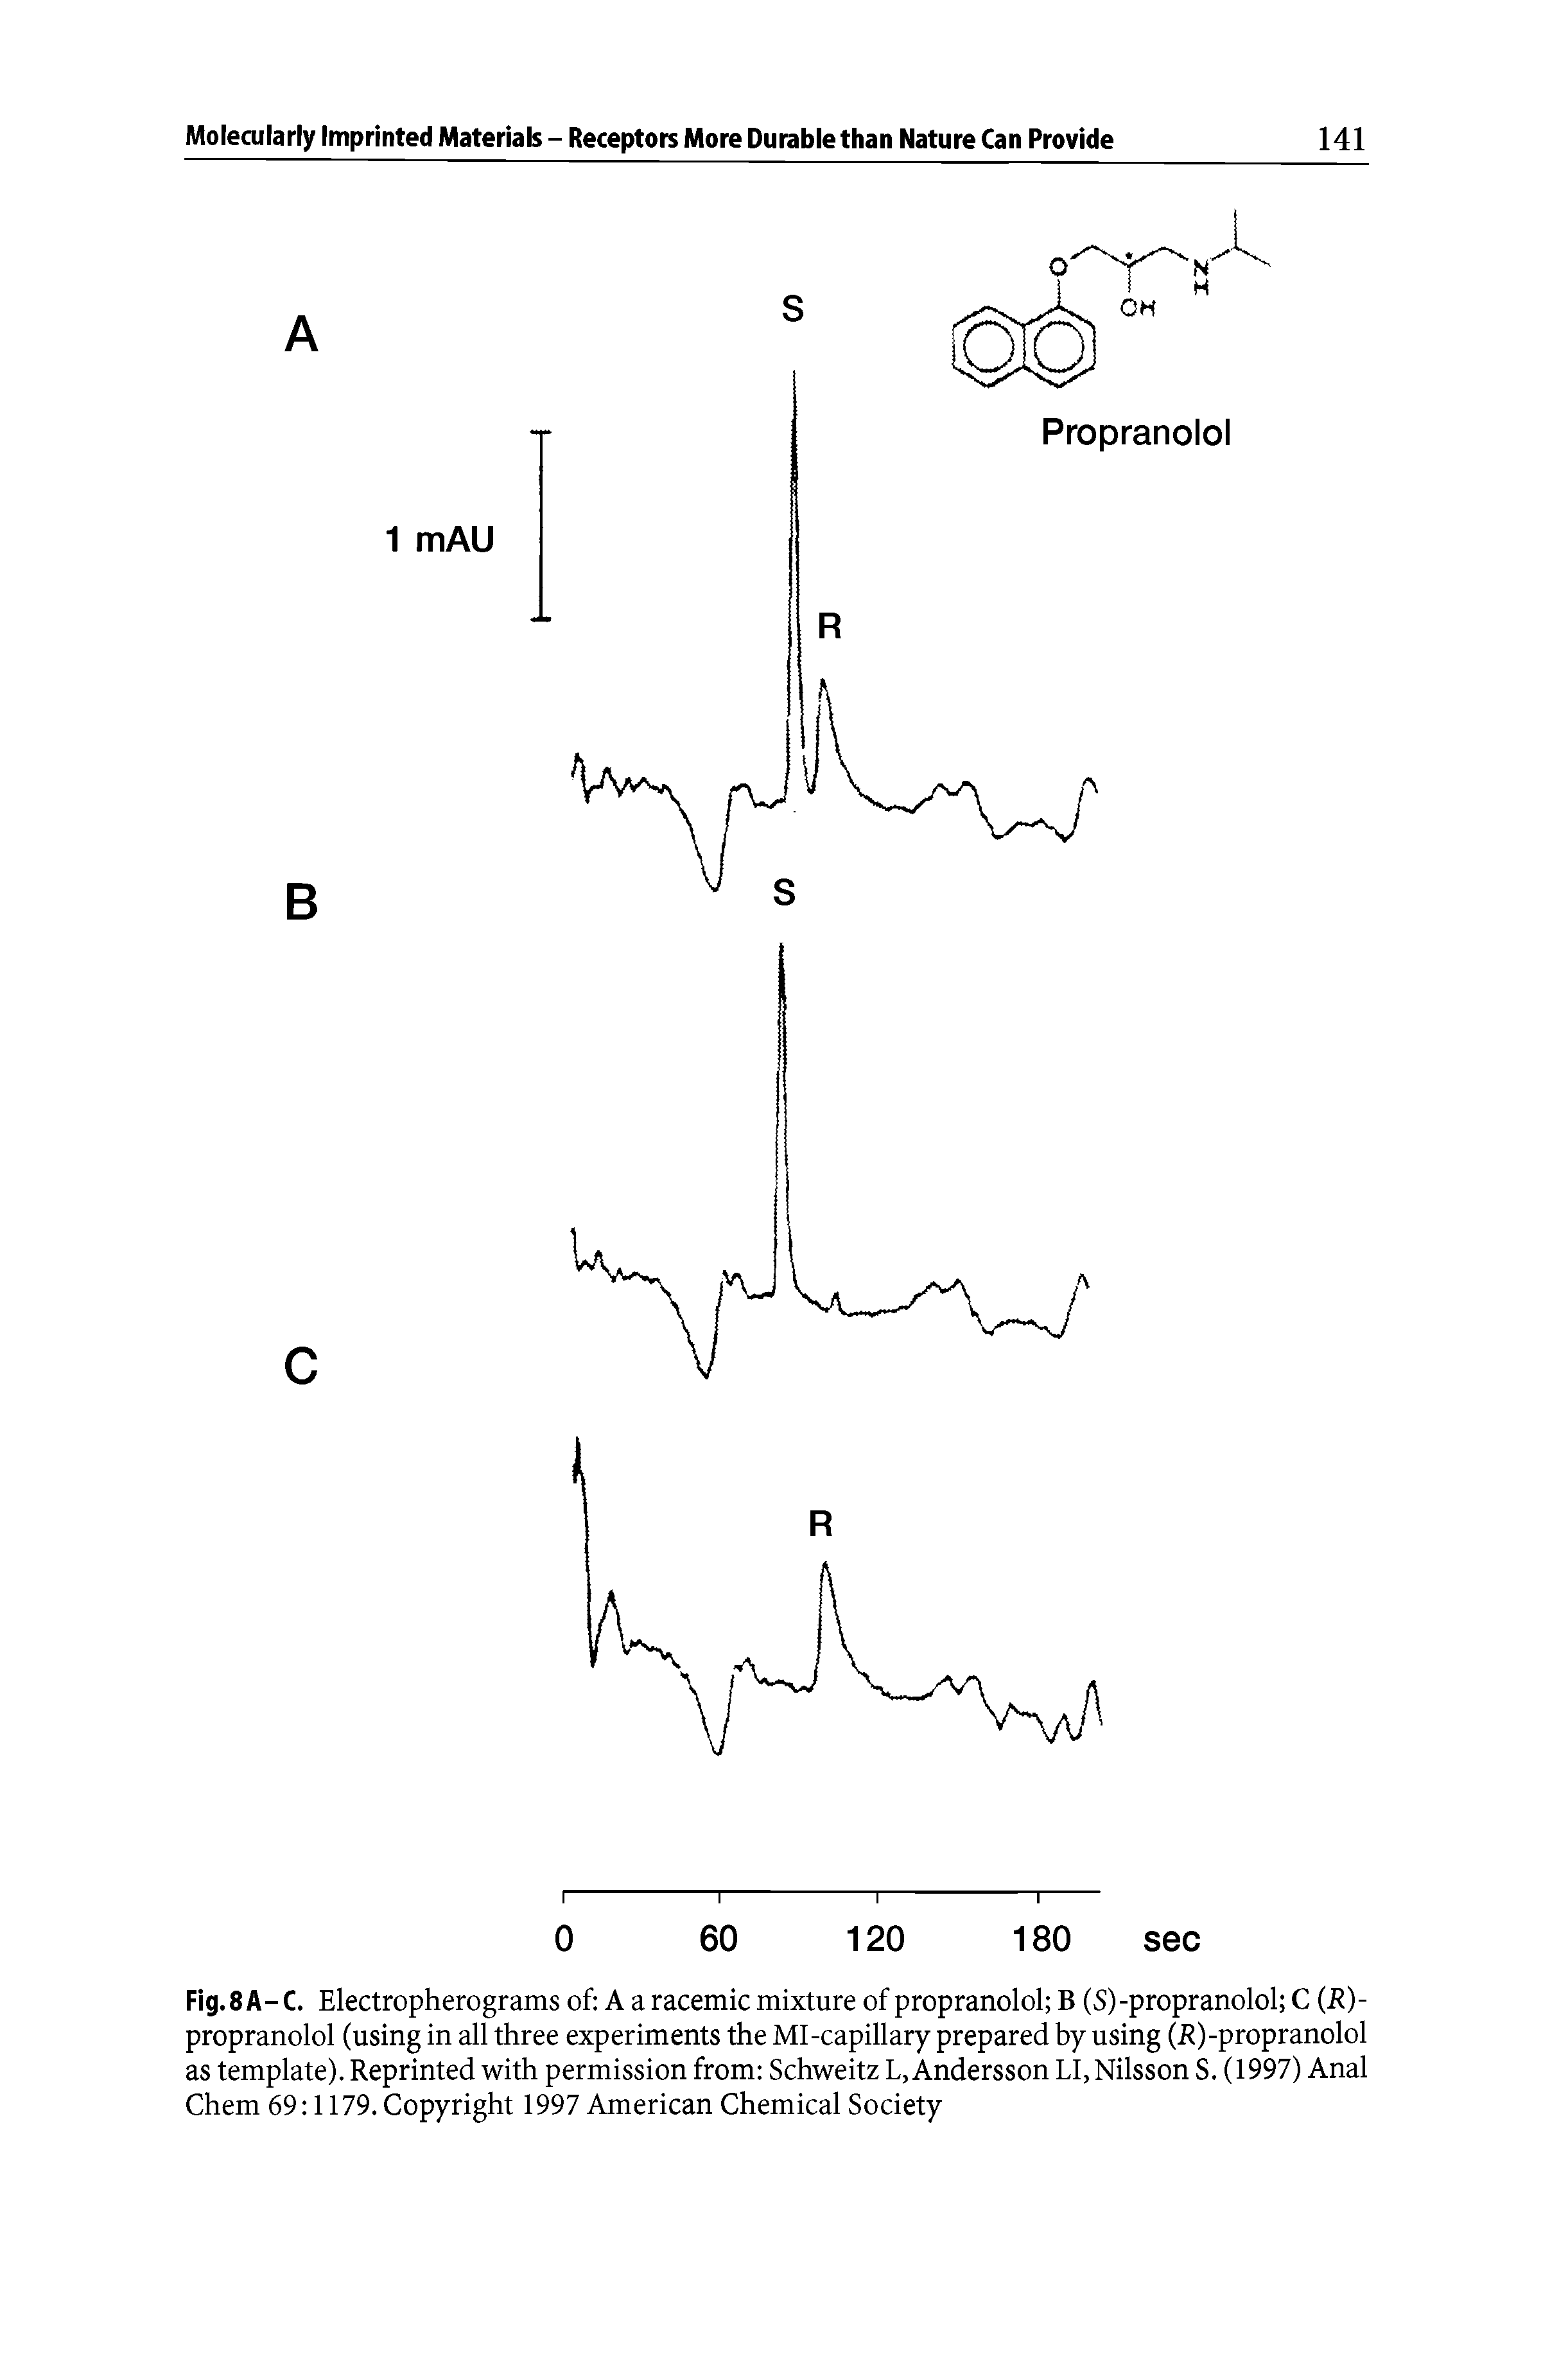 Fig.8A-C. Electropherograms of A a racemic mixture of propranolol B (S)-propranolol C (El-propranolol (using in all three experiments the MI-capillary prepared by using (E)-propranolol as template). Reprinted with permission from Schweitz L,Andersson LI, Nilsson S. (1997) Anal Chem 69 1179. Copyright 1997 American Chemical Society...